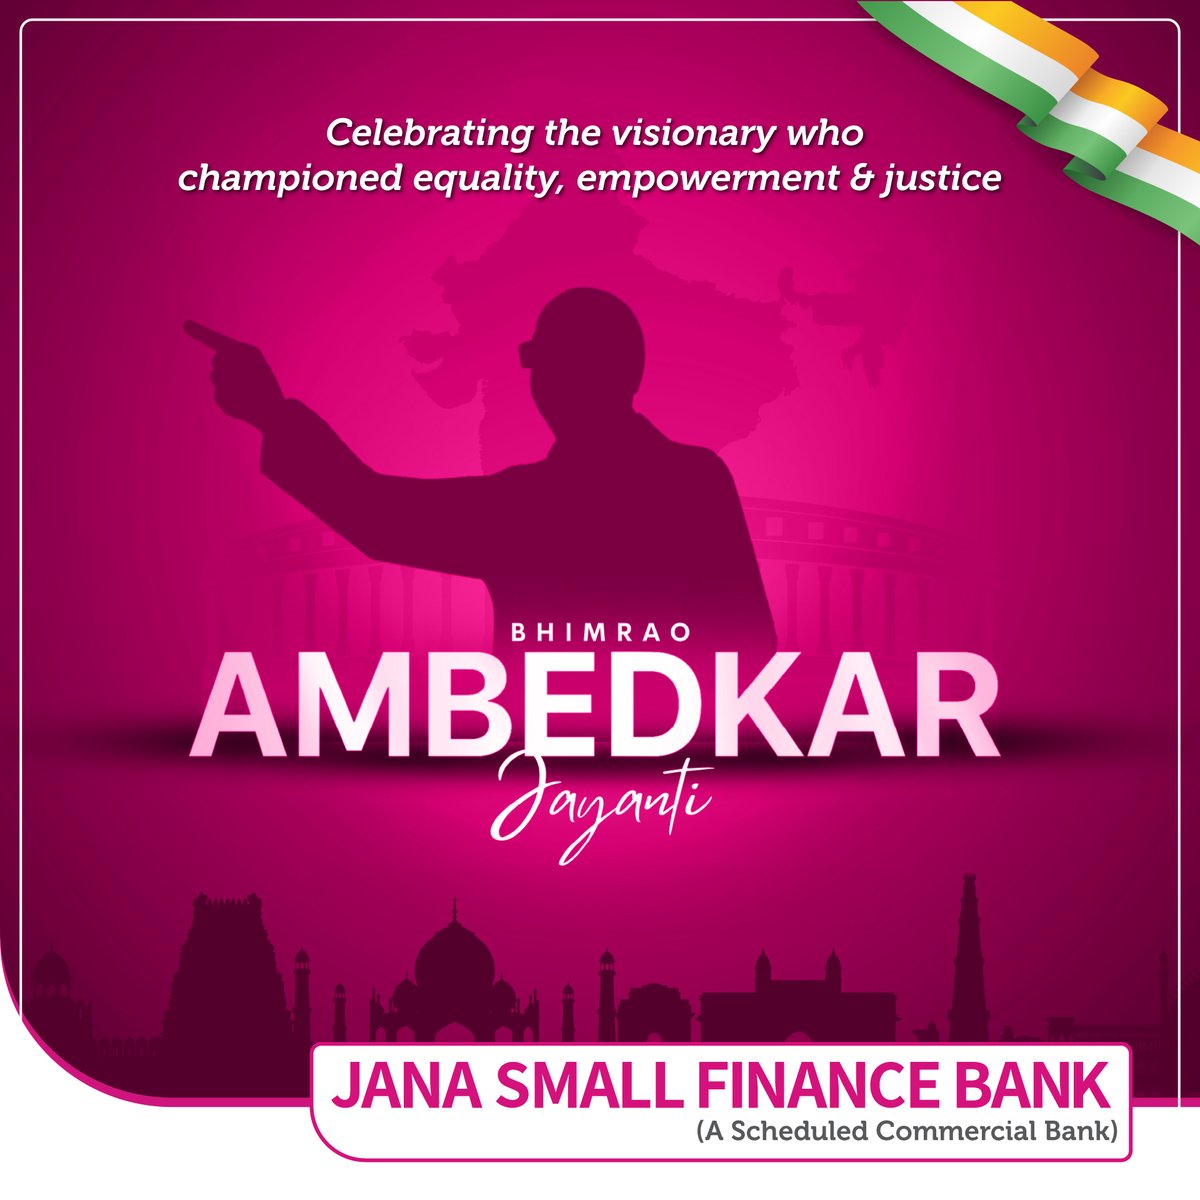 As we commemorate Dr. B.R. Ambedkar, let's pledge to uphold his ideals of justice, dignity, and empowerment for every individual in our society. #janabank #AmbedkarJayanti